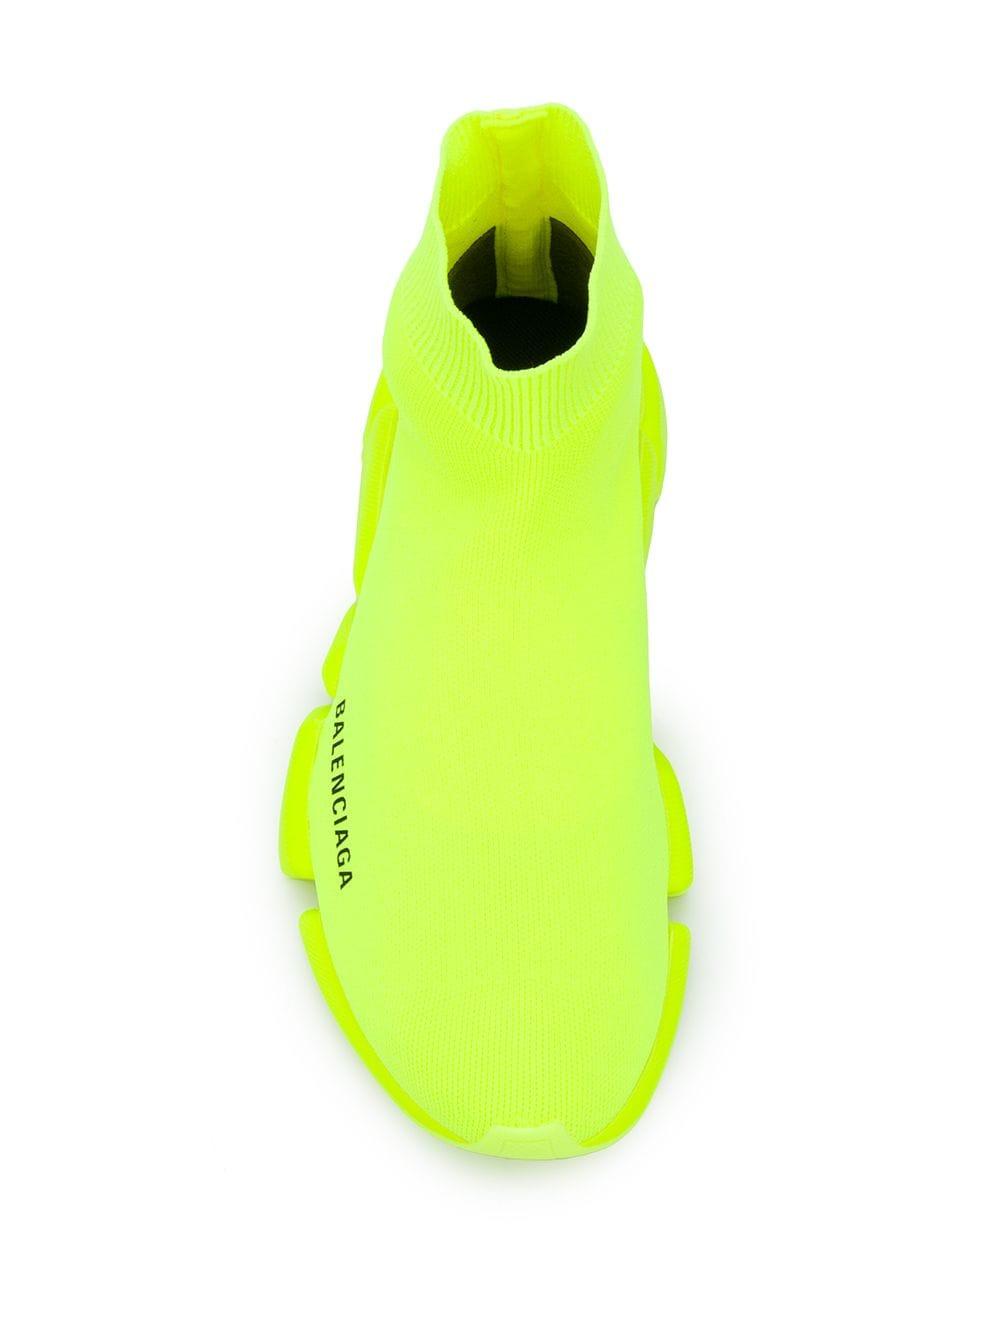 Balenciaga Synthetic Neon Speed Sock Sneakers in Yellow - Save 51% | Lyst